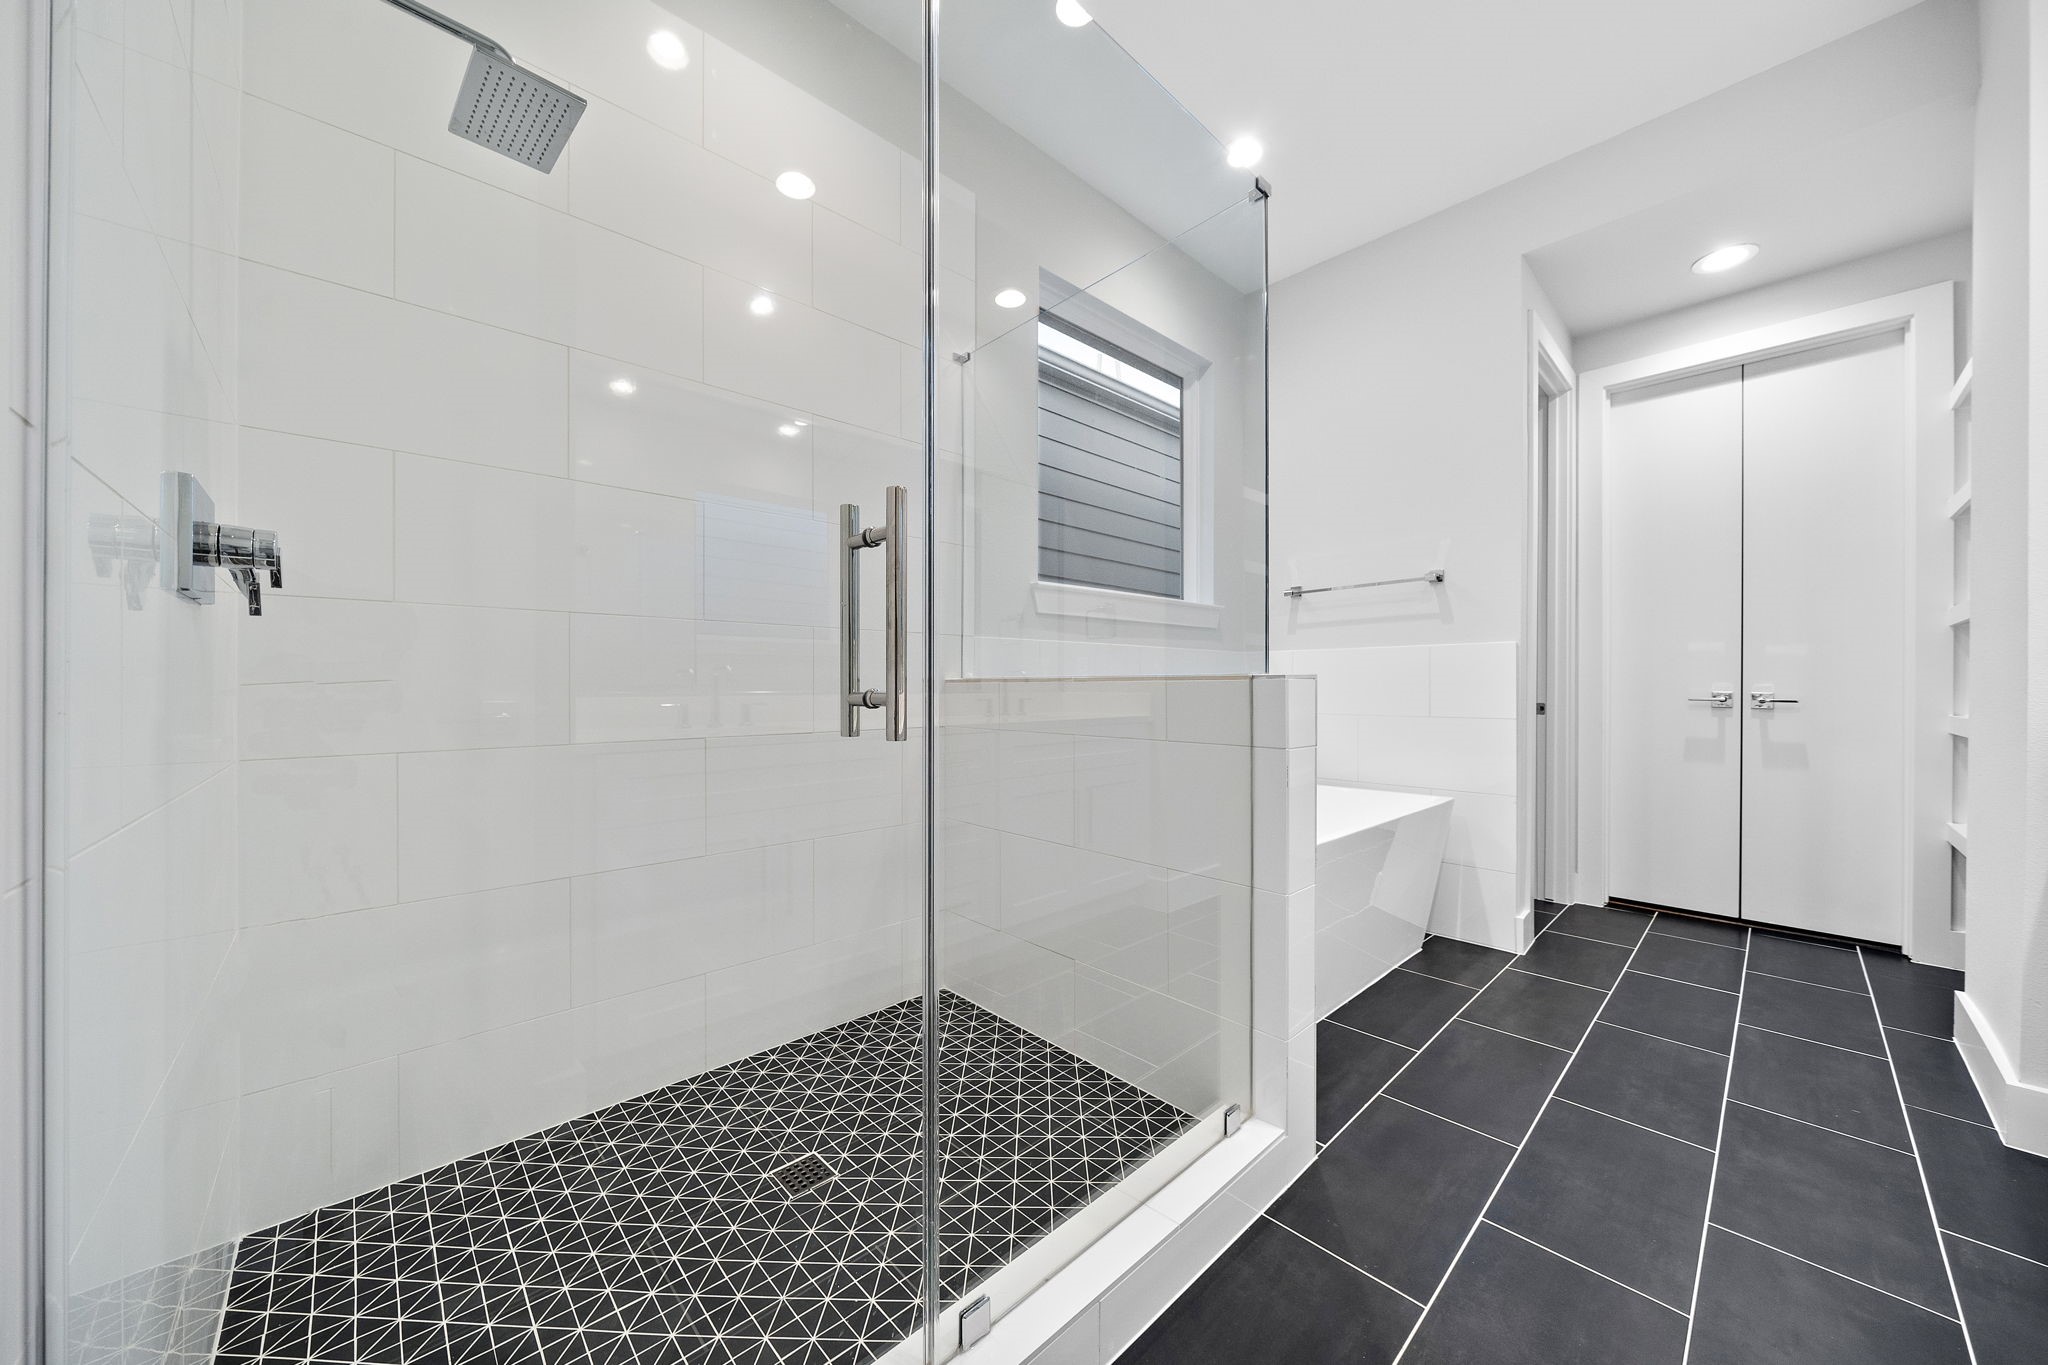 Gorgeous tile in the primary bath. Walk in shower and a soaker tub with a window for natural light.